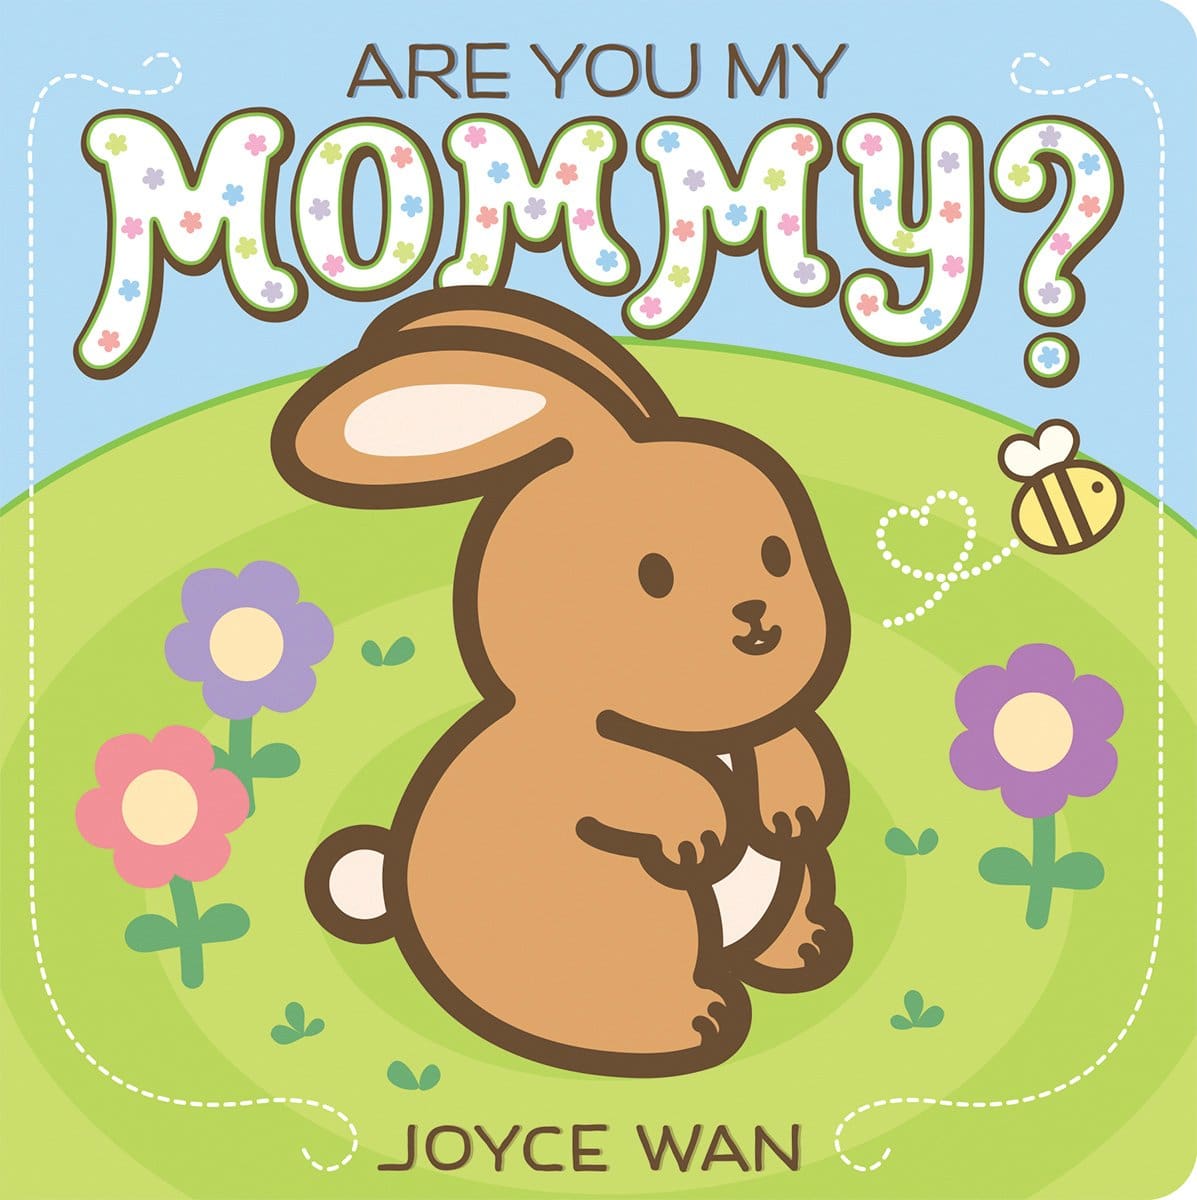 IMG : Are you my Mommy?